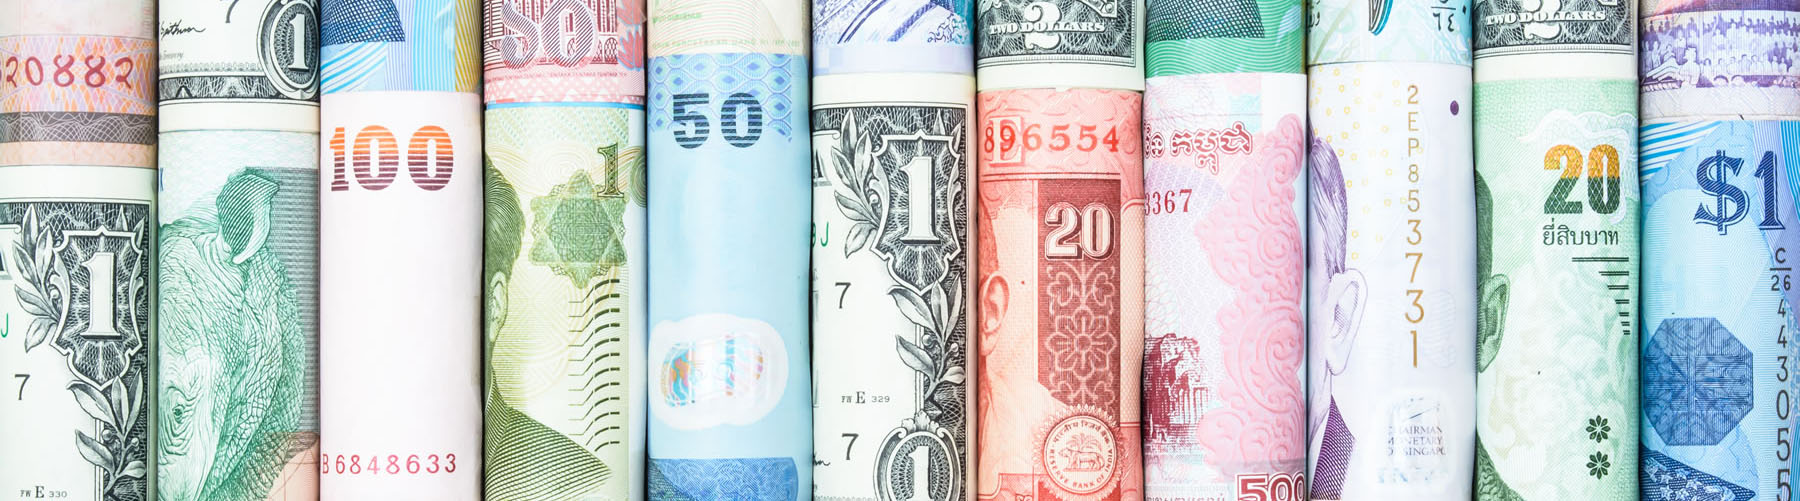 A backgrounds with colorful of many roll currency from many country